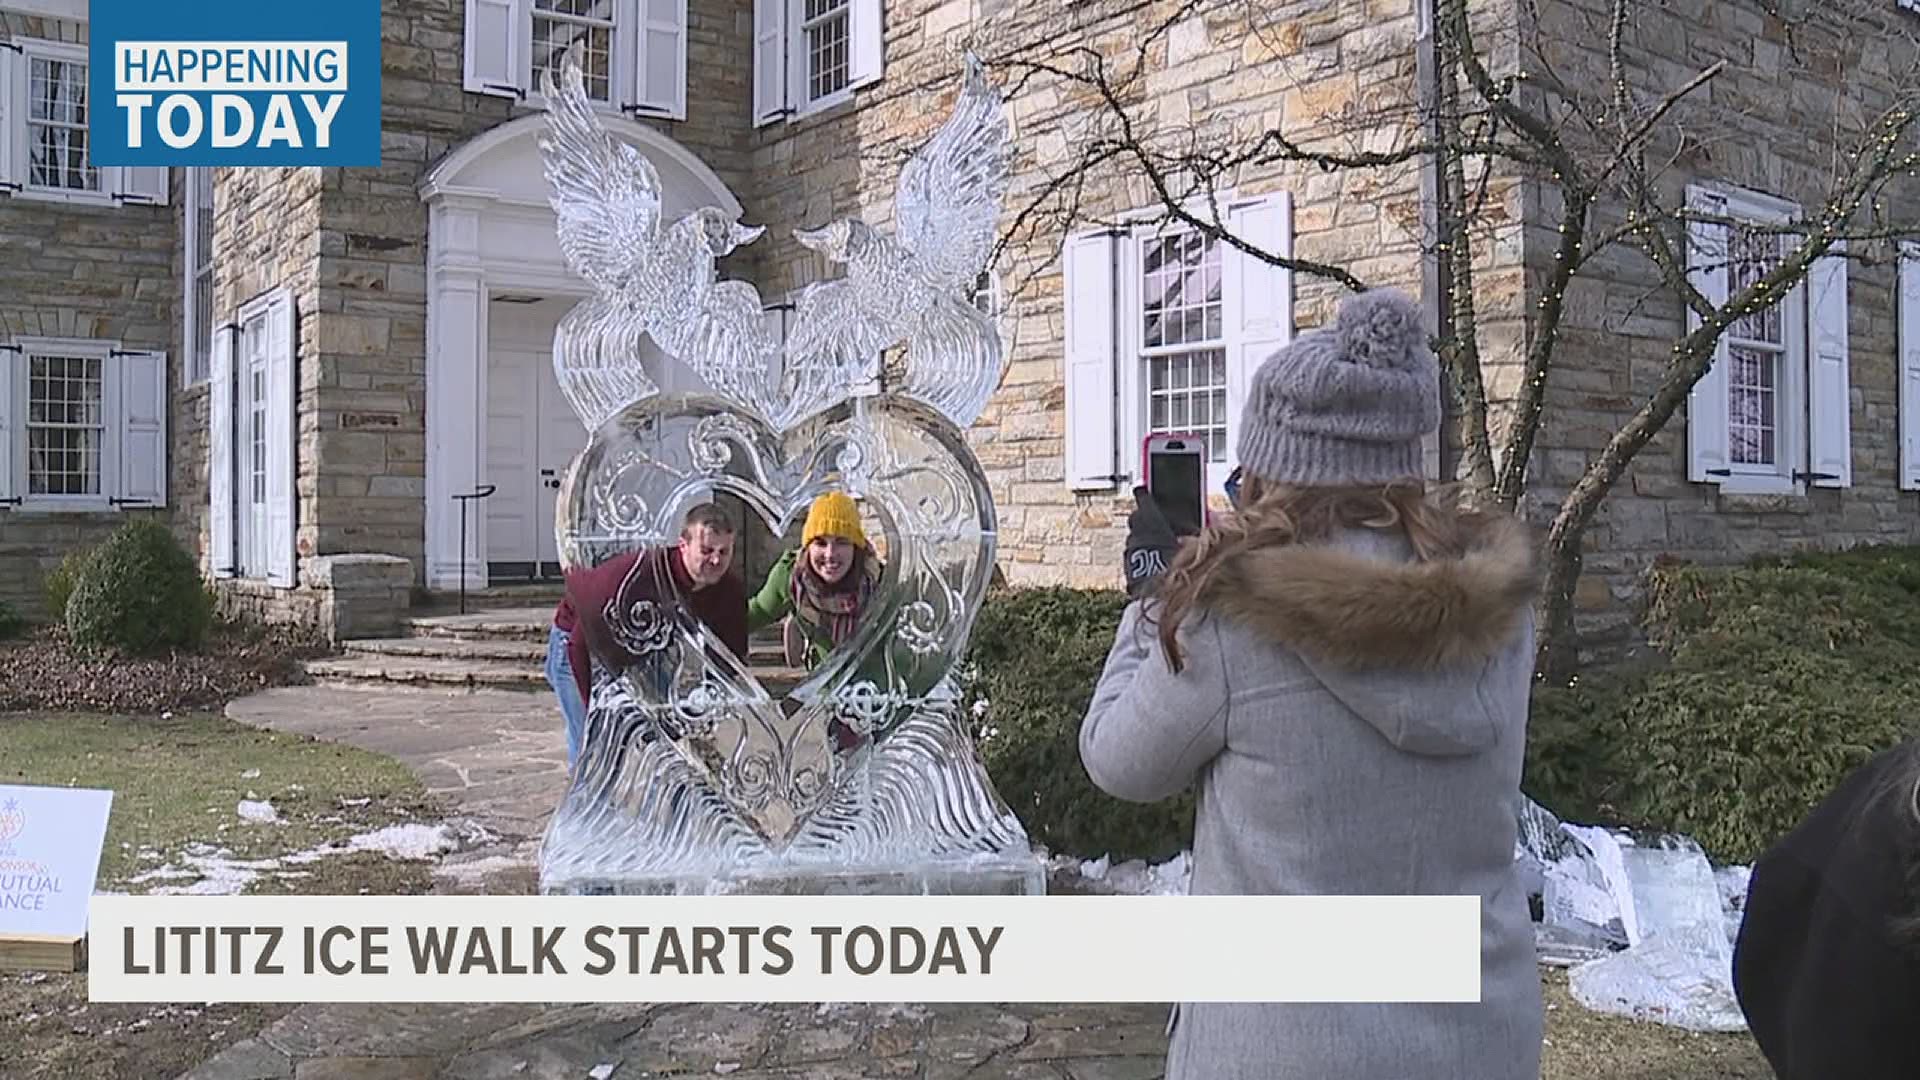 The Fire and Ice Festival is their second largest event. The Mayor of Lititz, and organizers of the festival hope to go back to the Fire and Ice tradition next year.